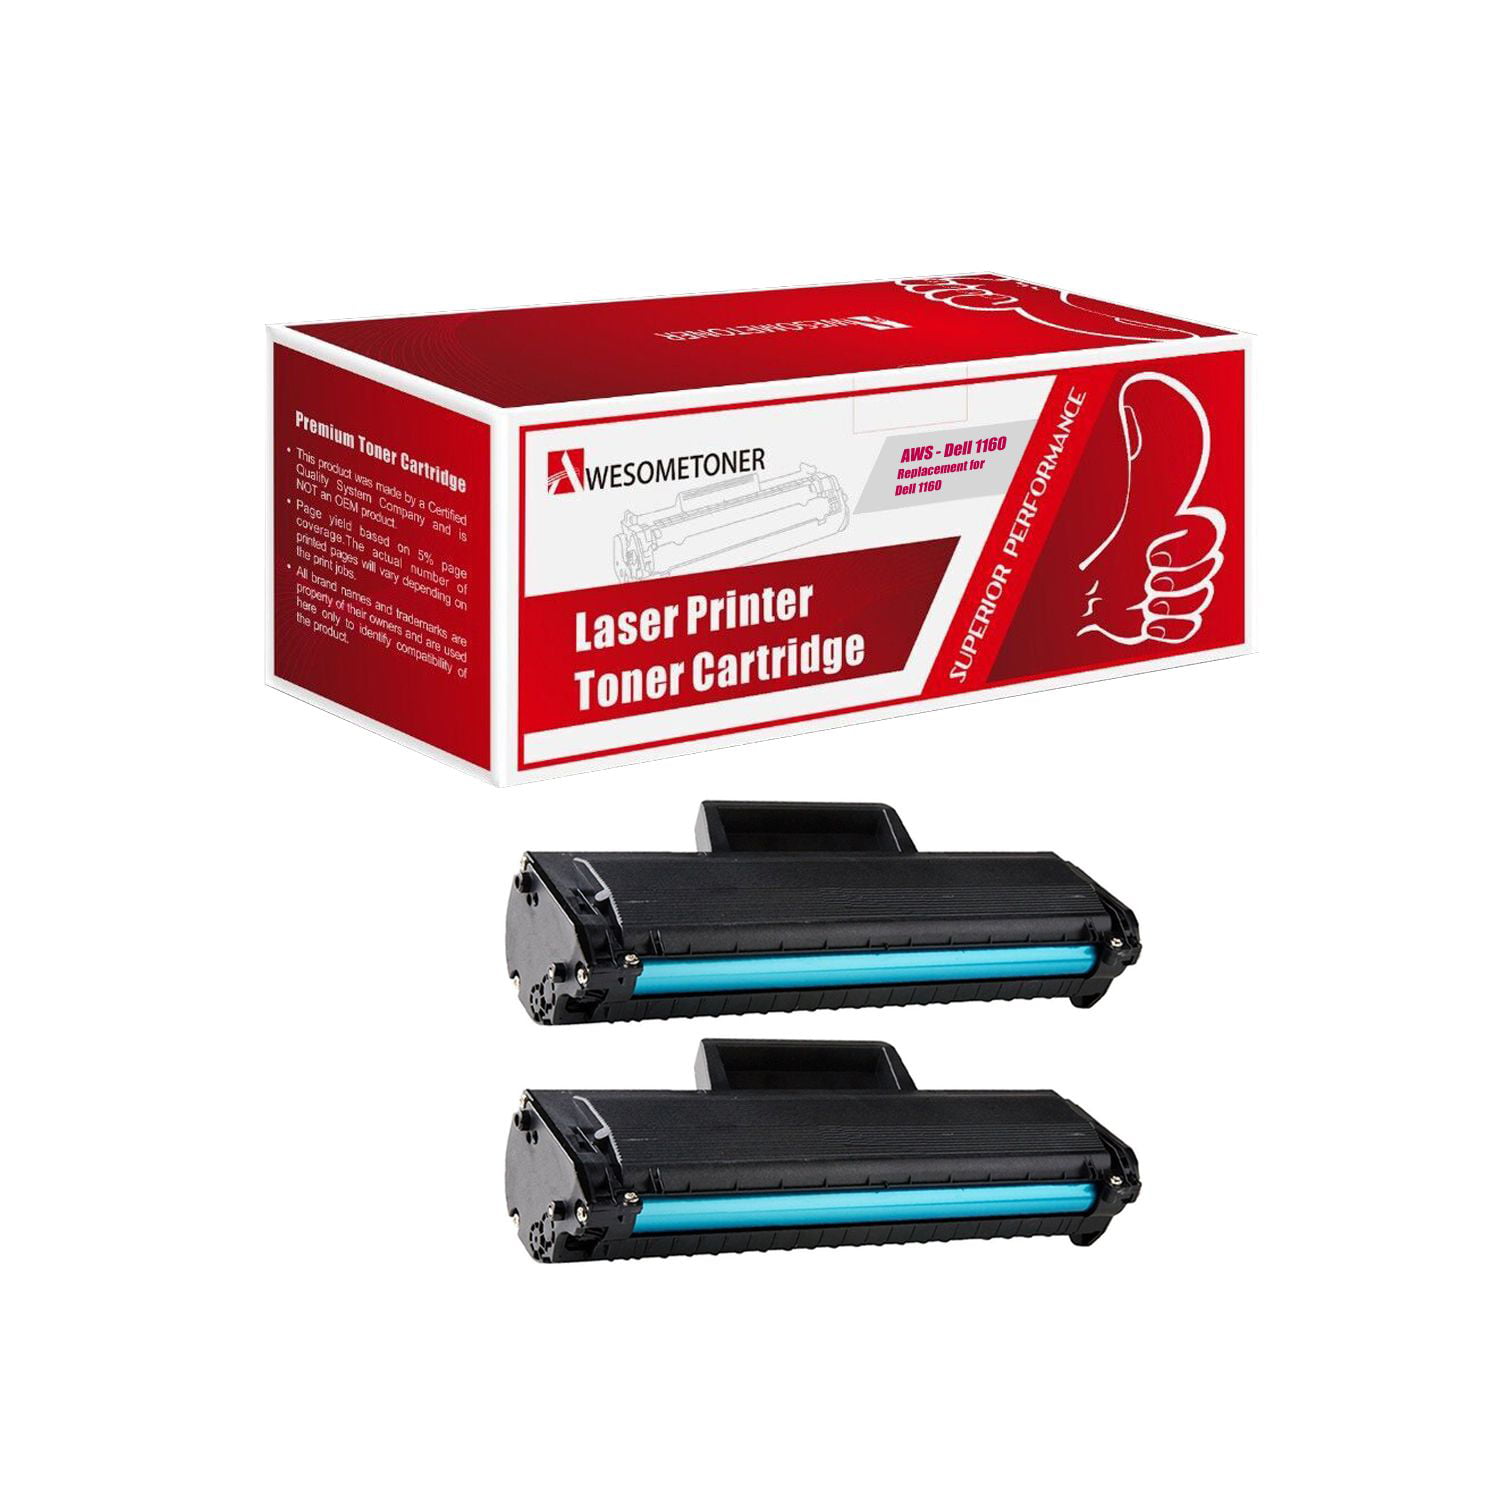 Awesometoner Compatible Toner Cartridge Replacement for Dell  1160（331-7335）for Dell B1160, B1160W (Black, 2-Pack) | Walmart Canada